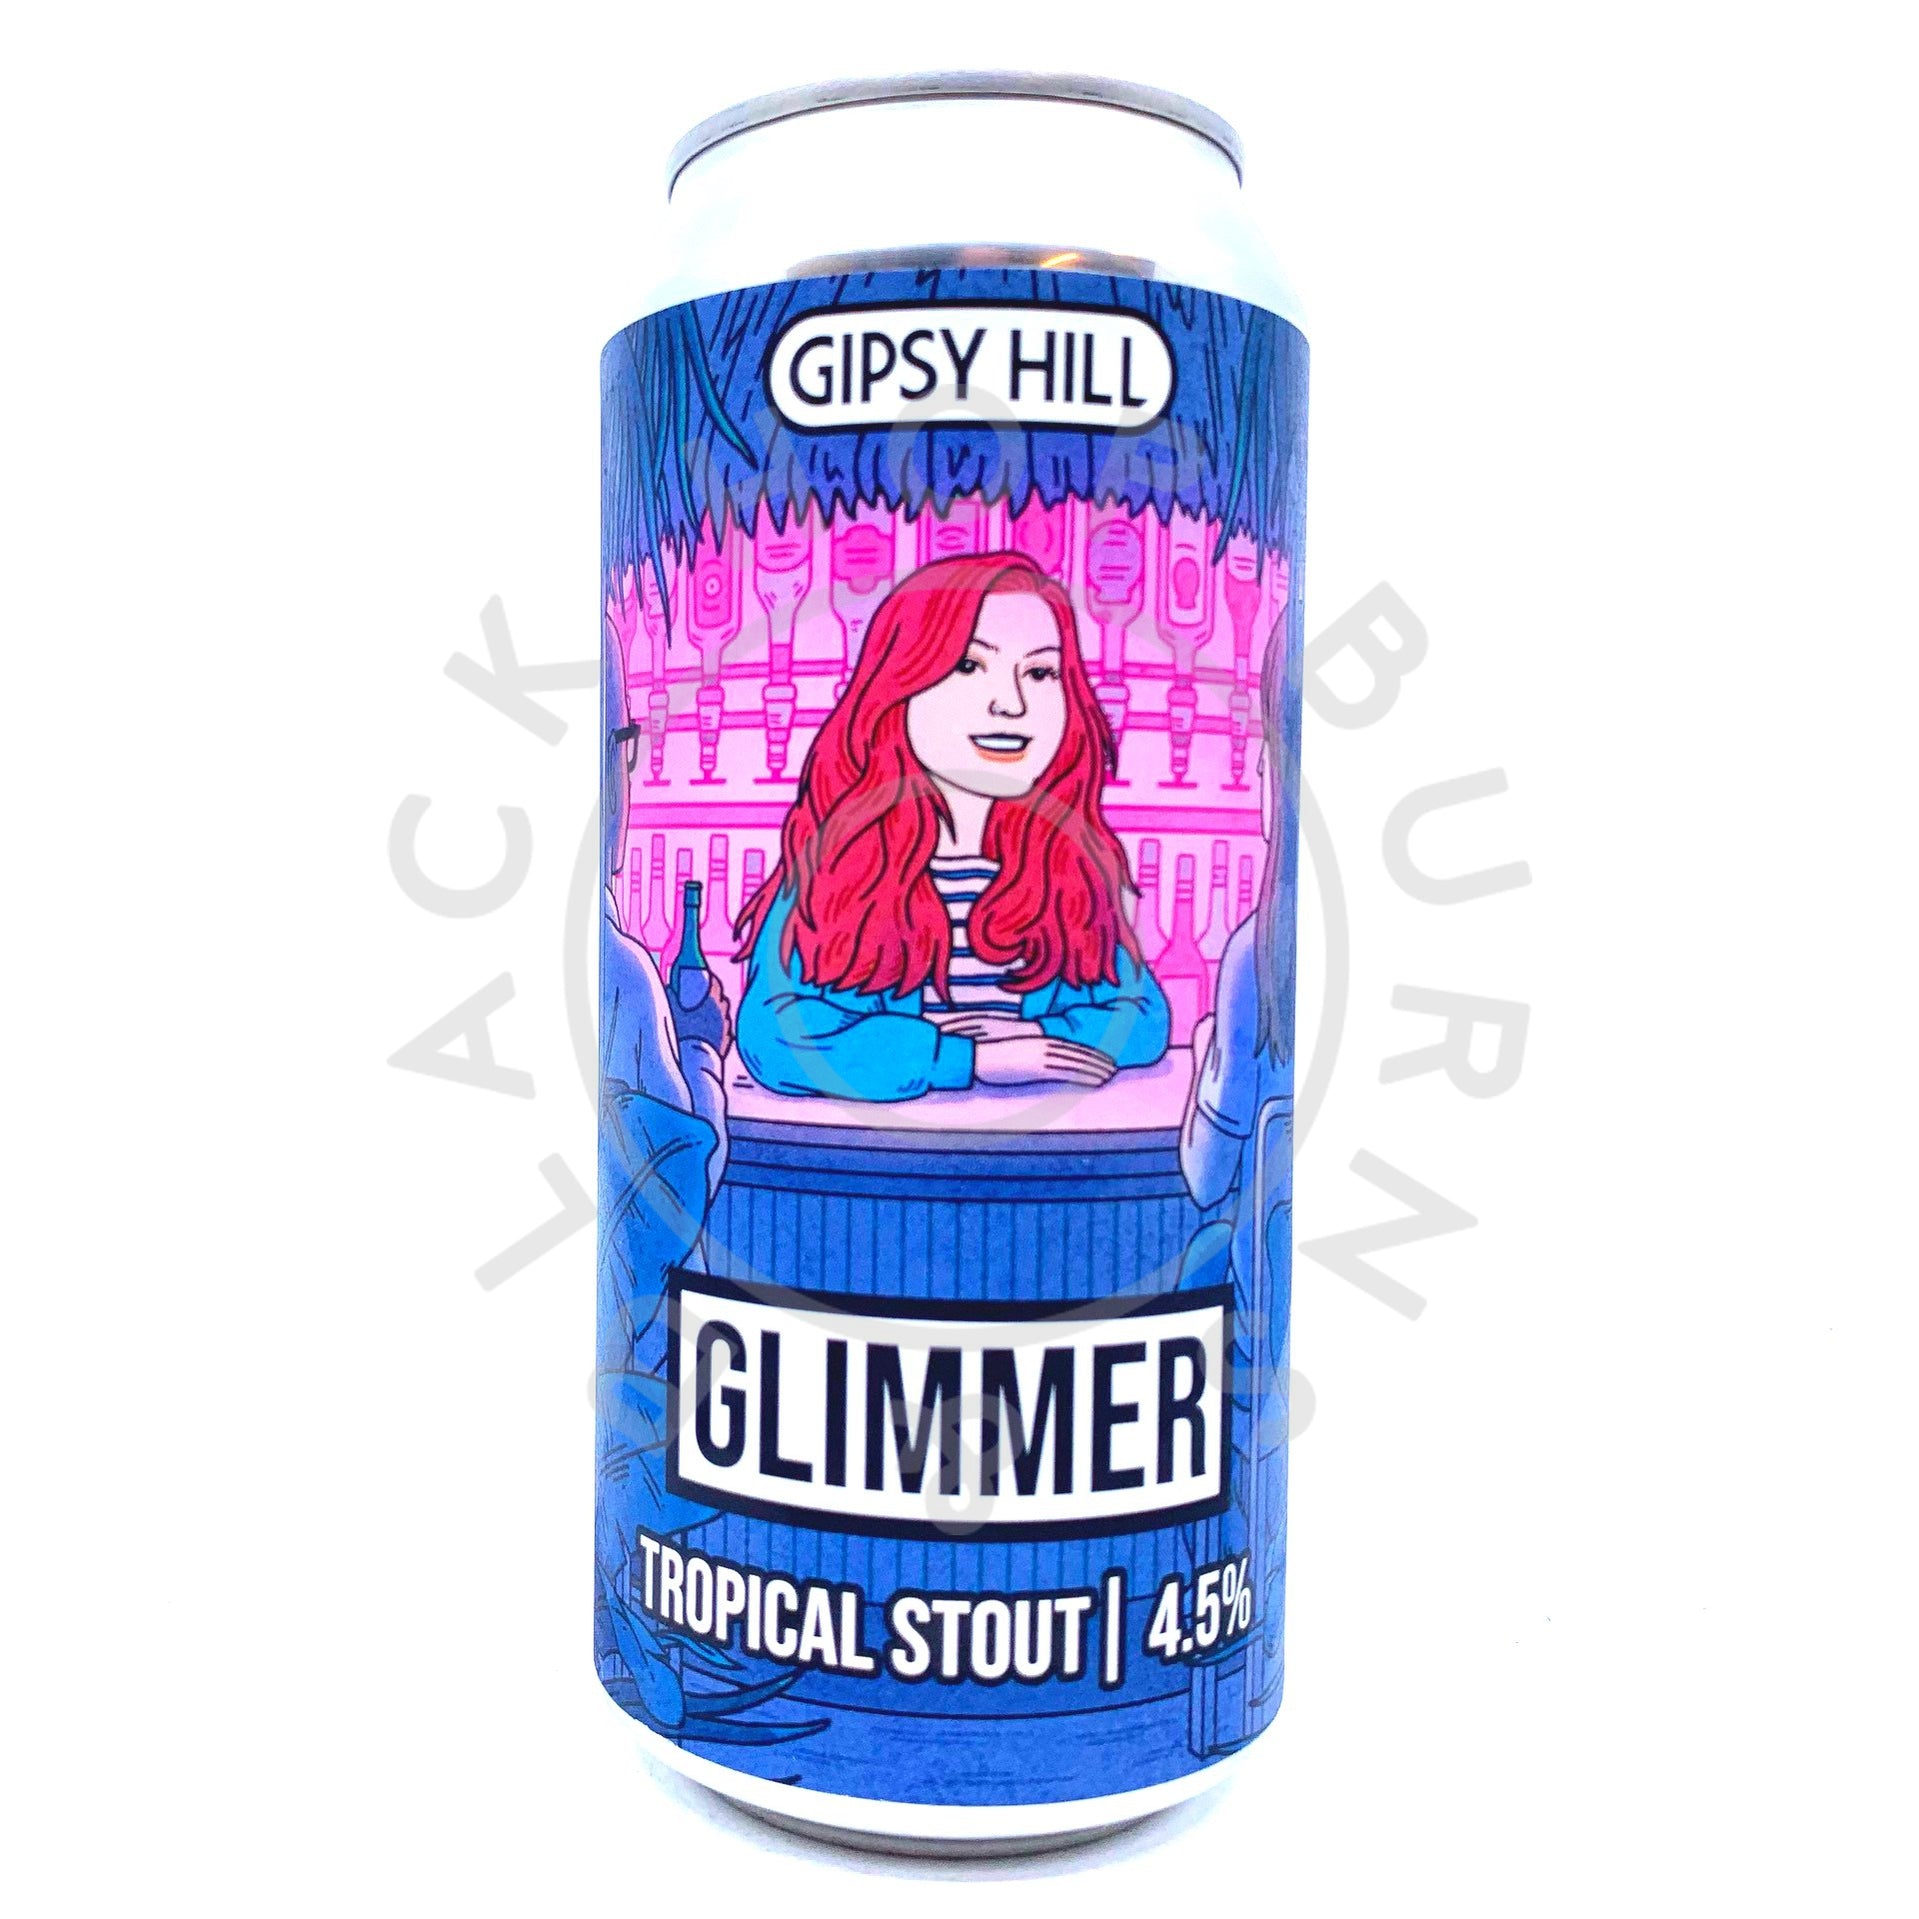 Gipsy Hill Glimmer Tropical Stout 4.5% (440ml can)-Hop Burns & Black